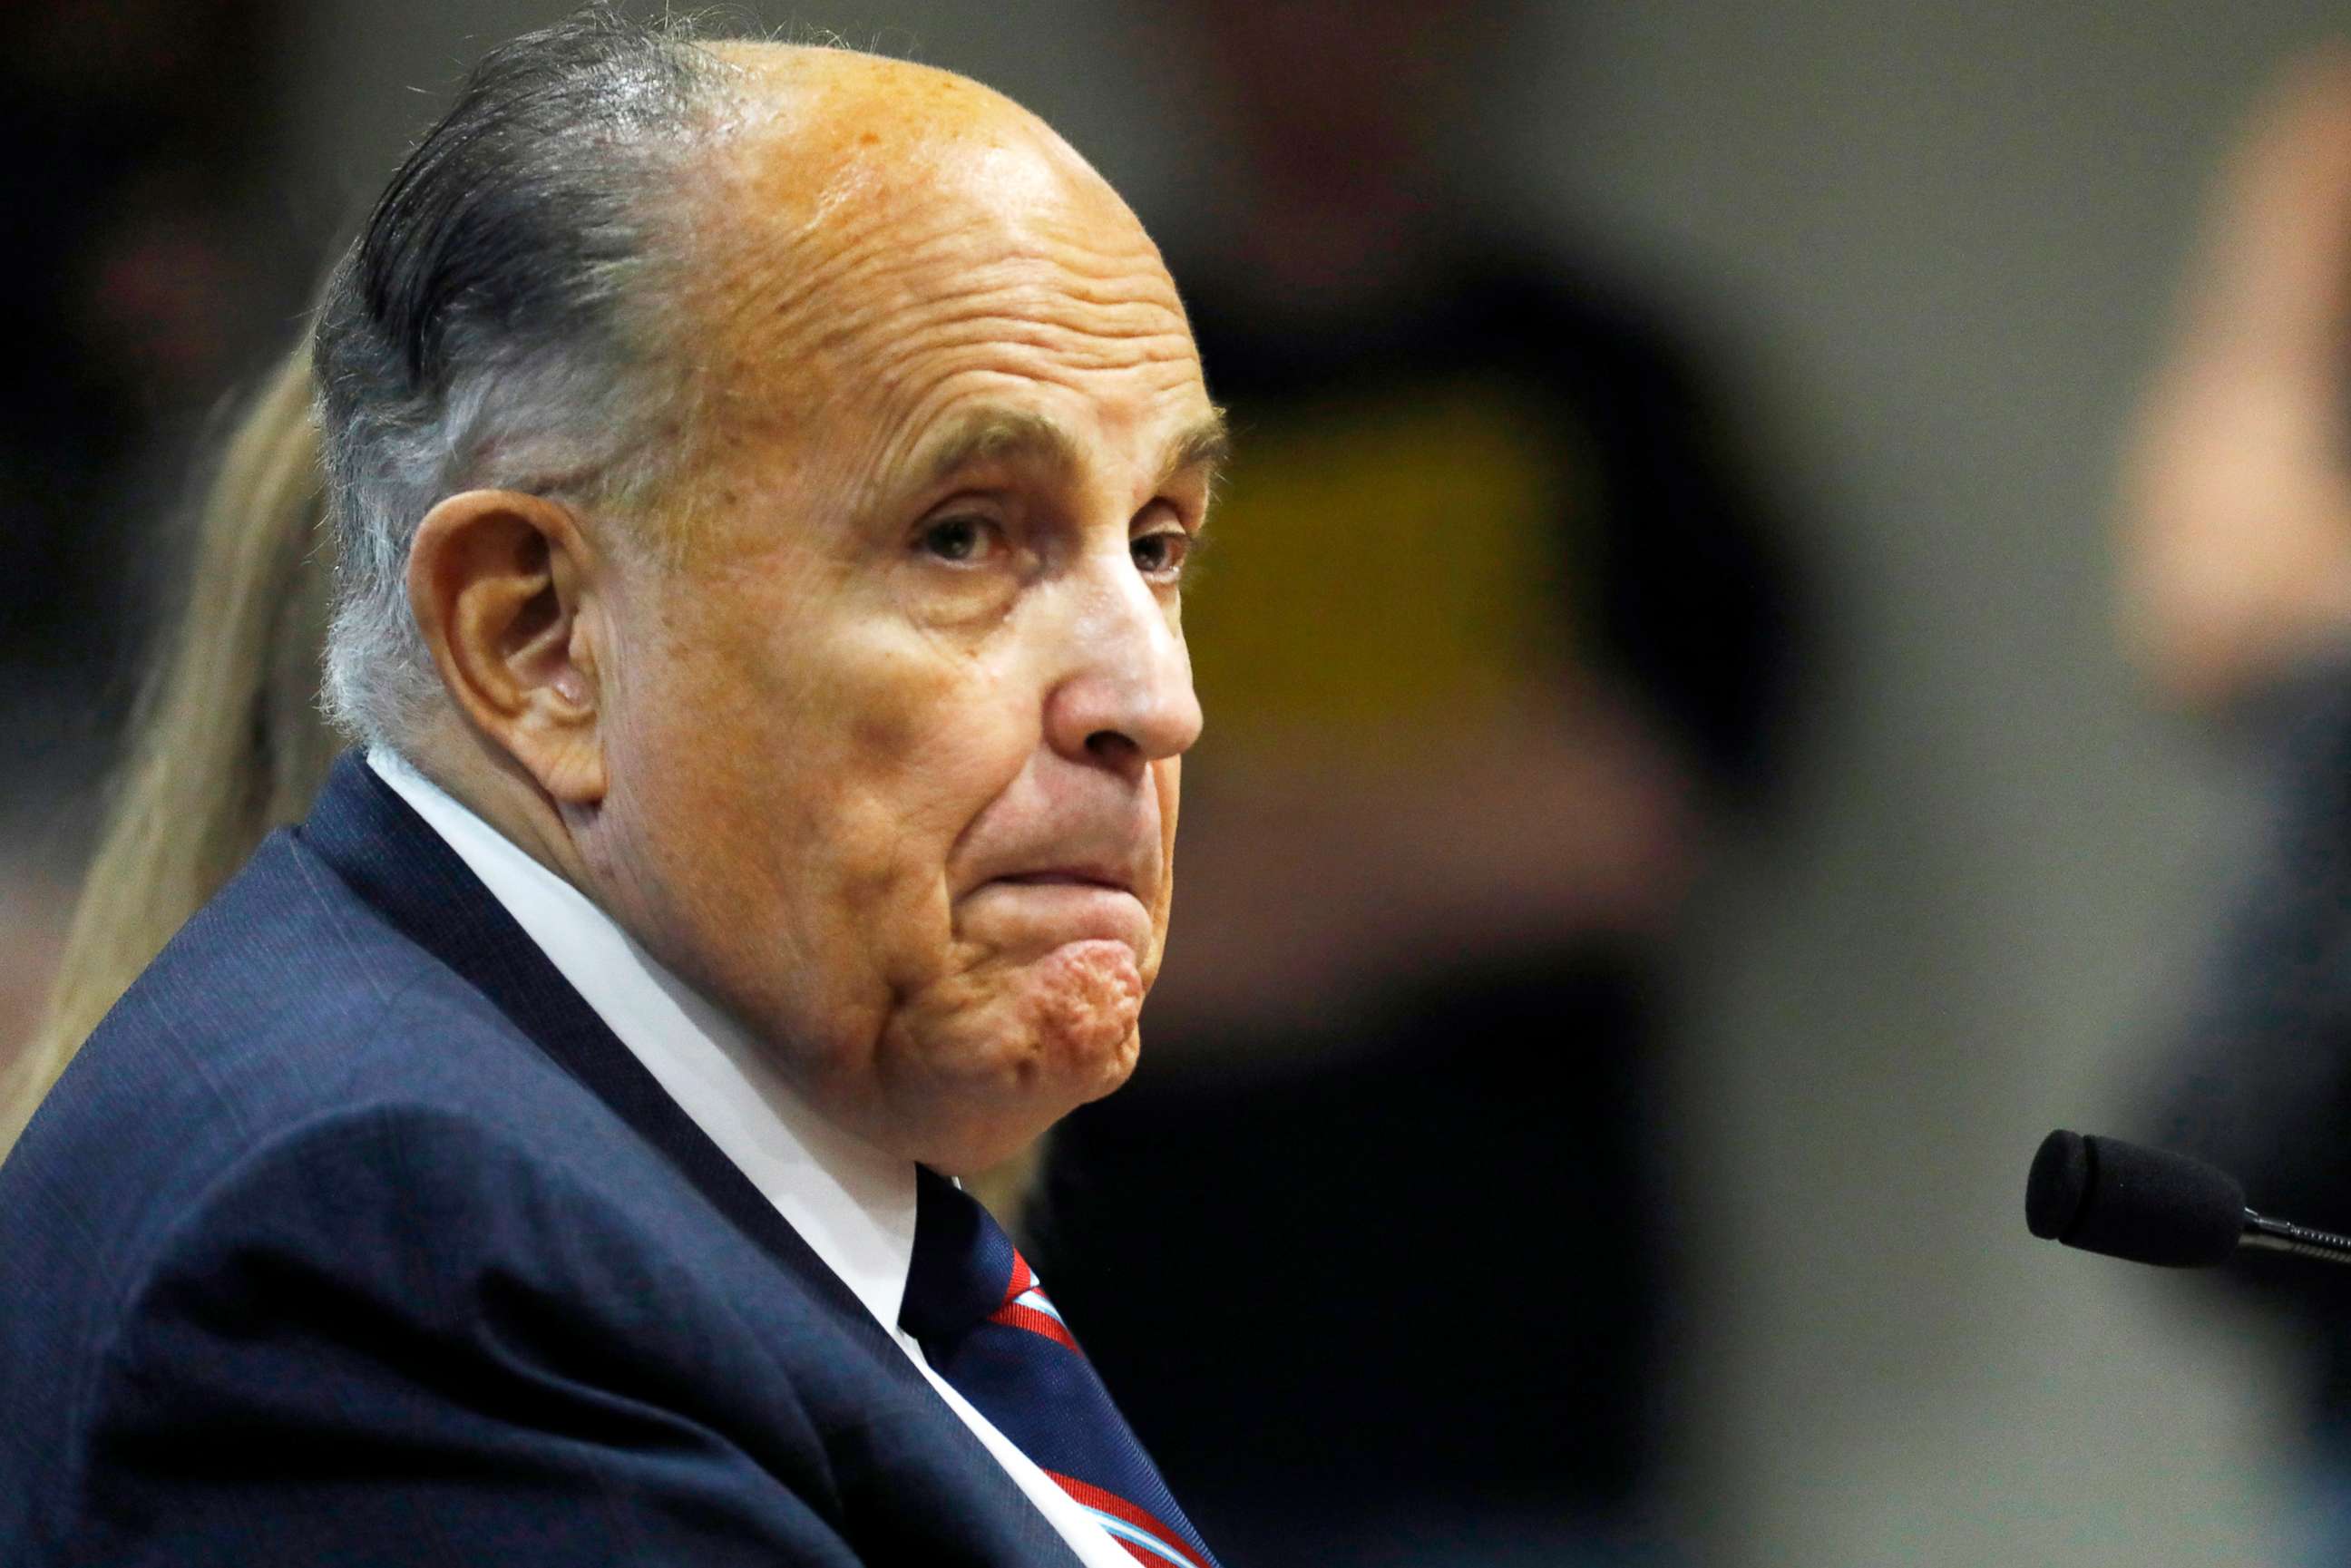 PHOTO: Rudy Giuliani attends a meeting of the Michigan House Oversight Committee in Lansing, Mich., Dec. 2, 2020.